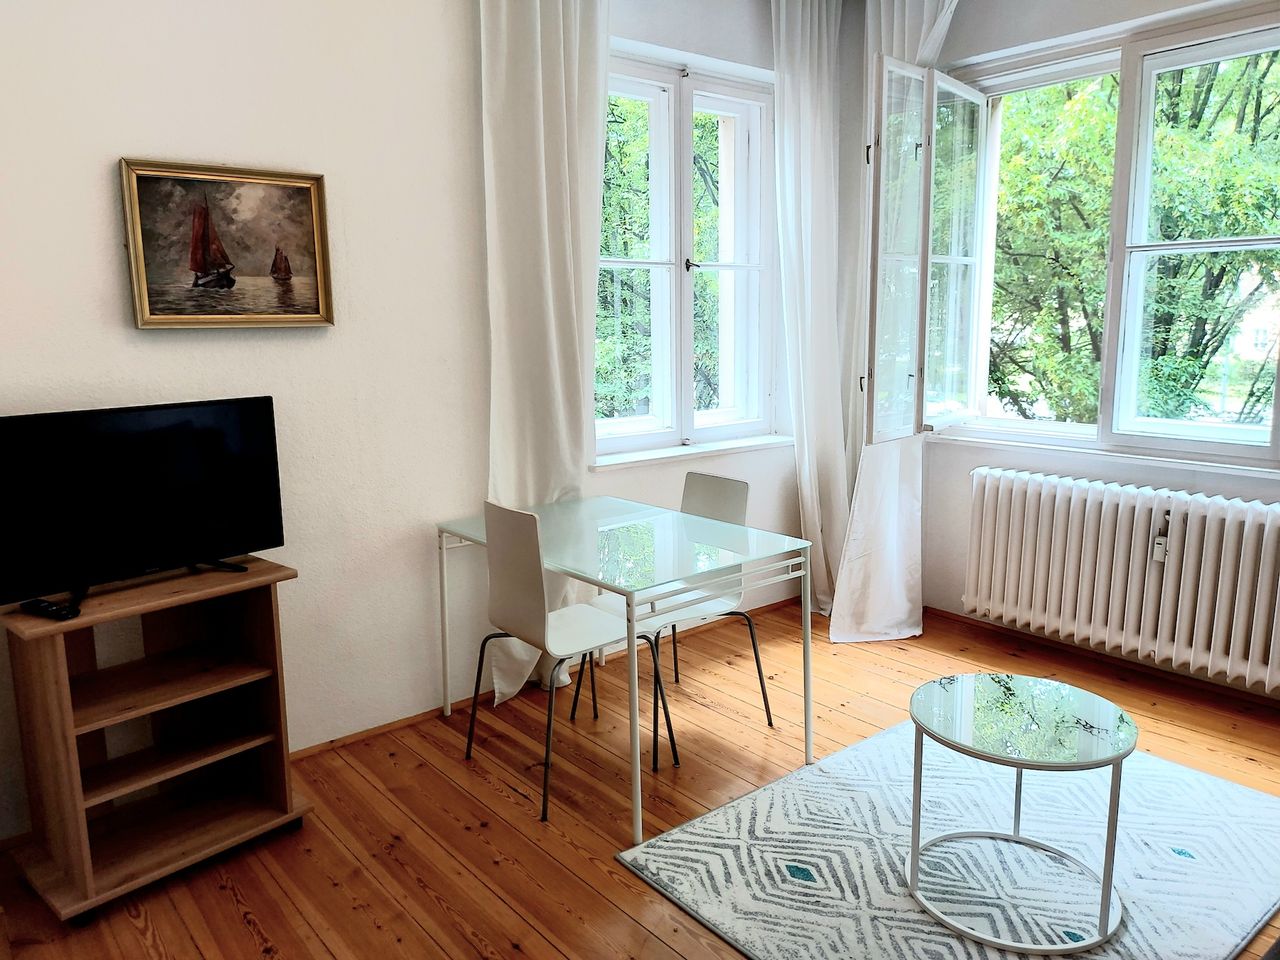 Very sunny and cosy apartment with balcony to green area, near FU and S1 Sundgauer Str.Station